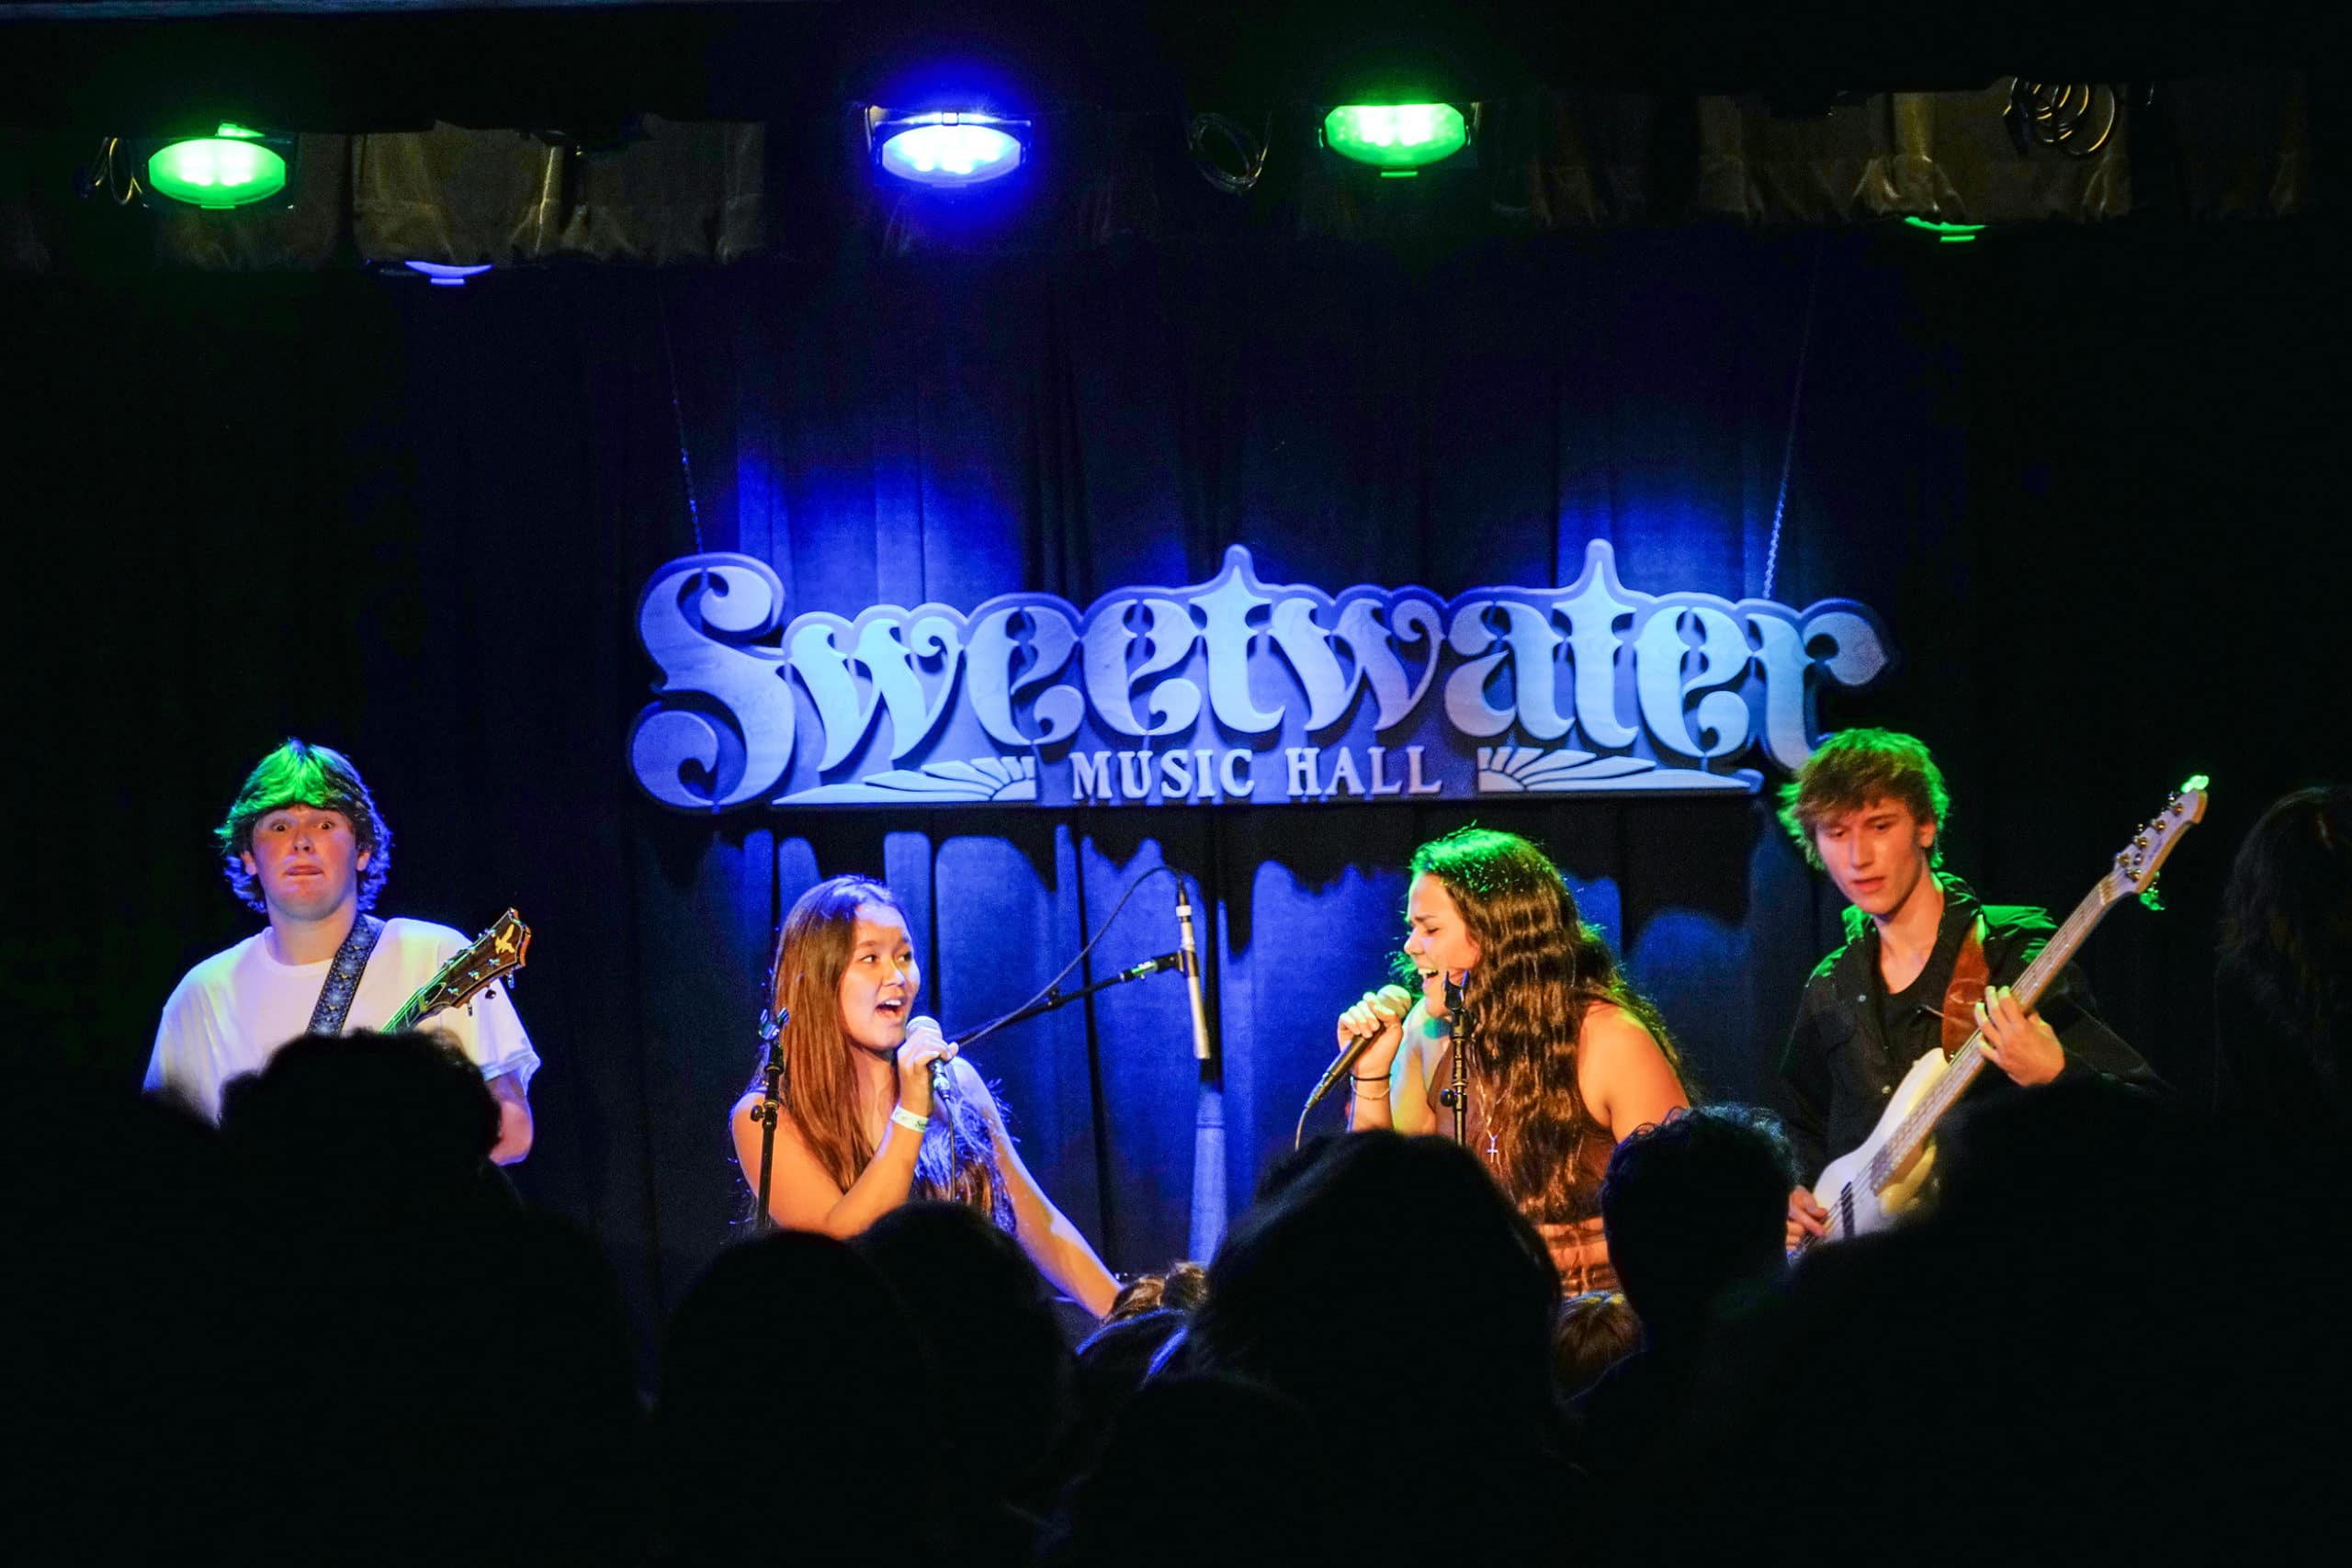 Rock Bands at Sweetwater Music Hall 1